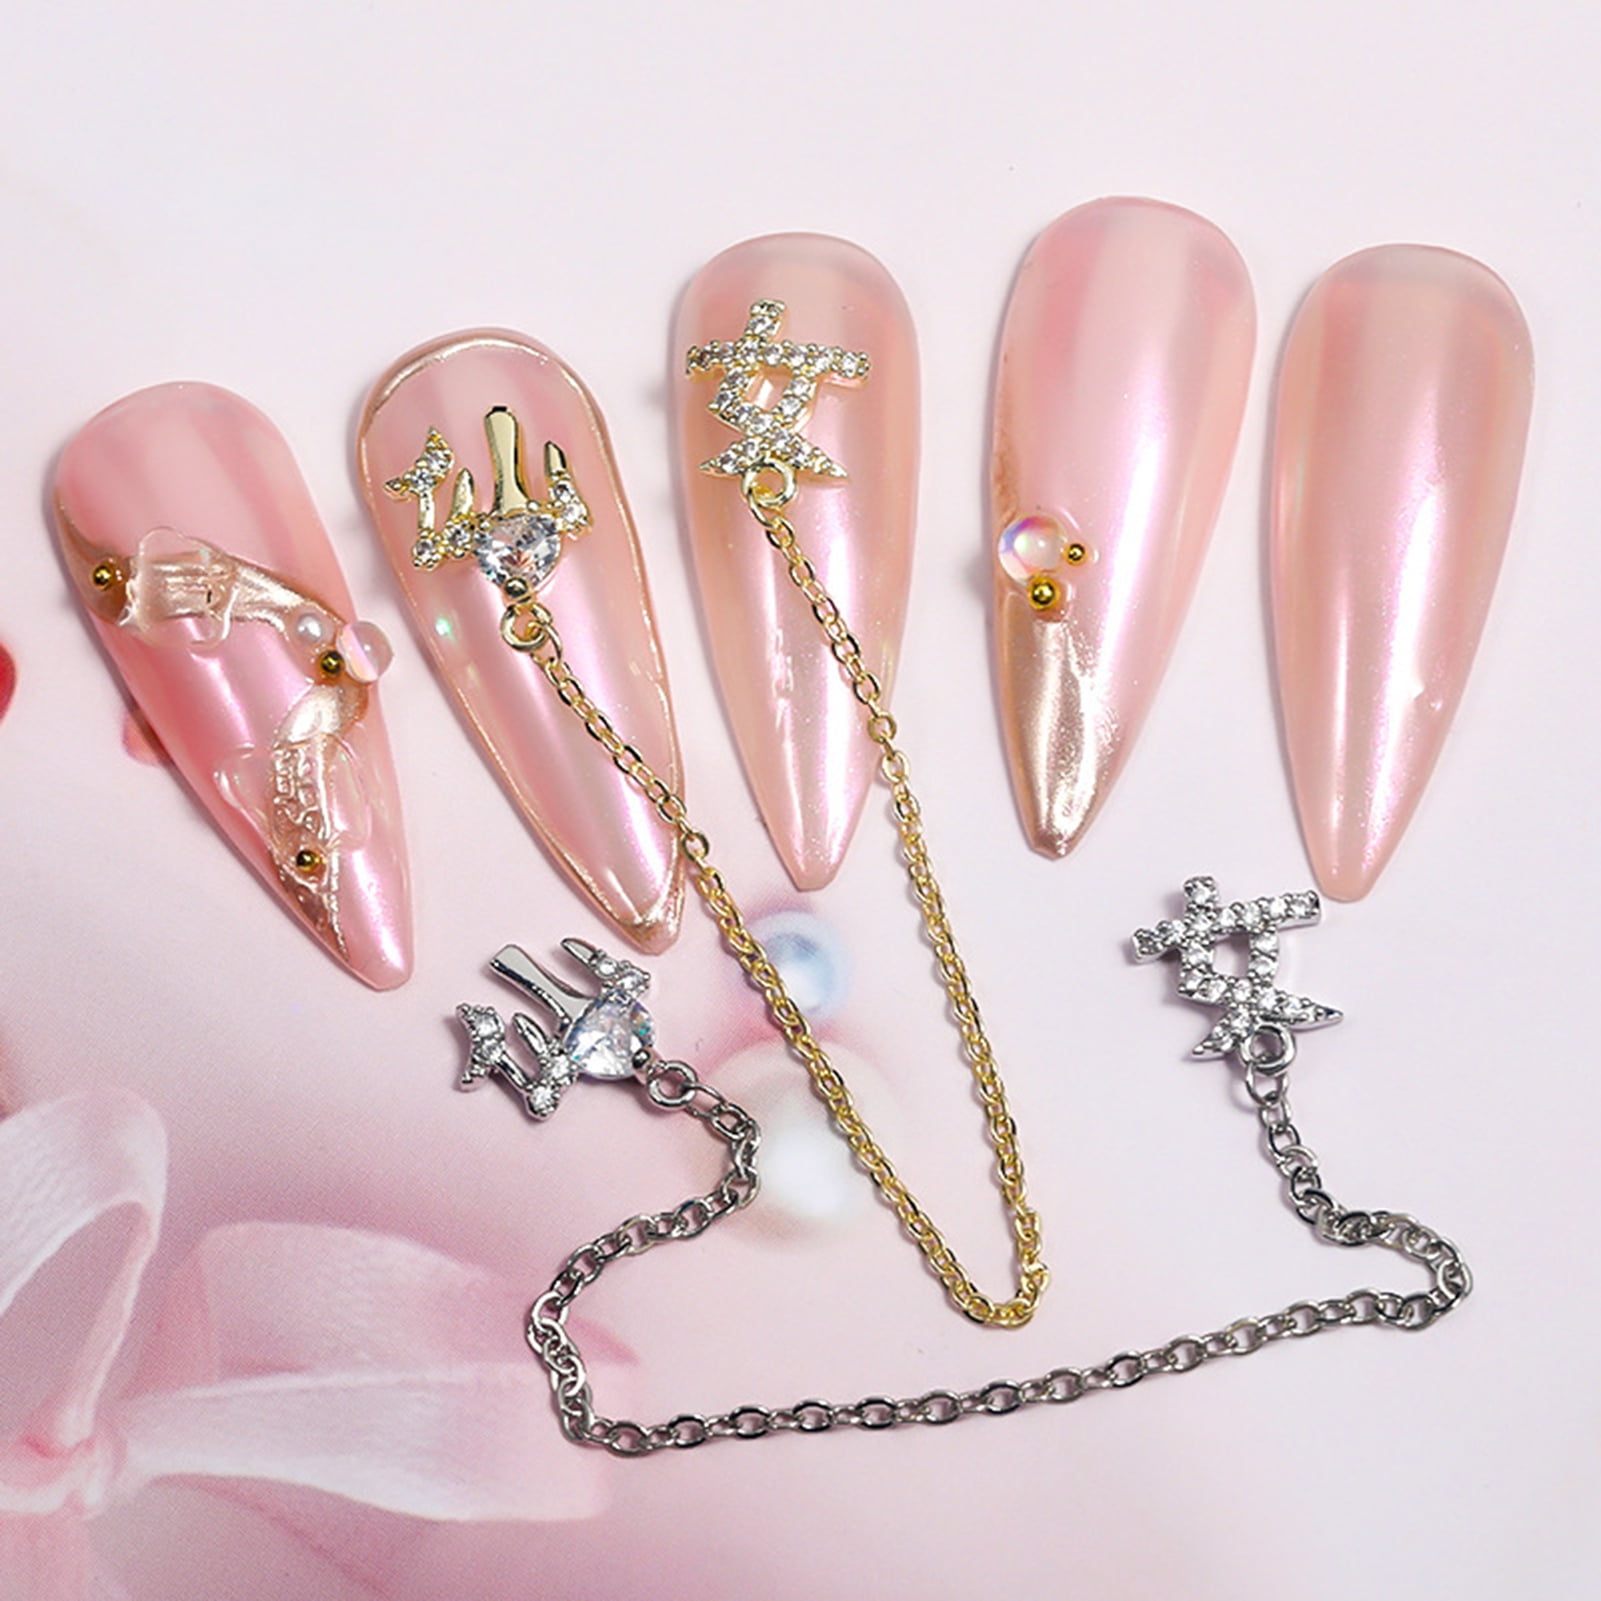 opvise Nail Charm Vivid 3D Effect Gloss Water Drop Dangle Chain Charms  Decorations for Manicure